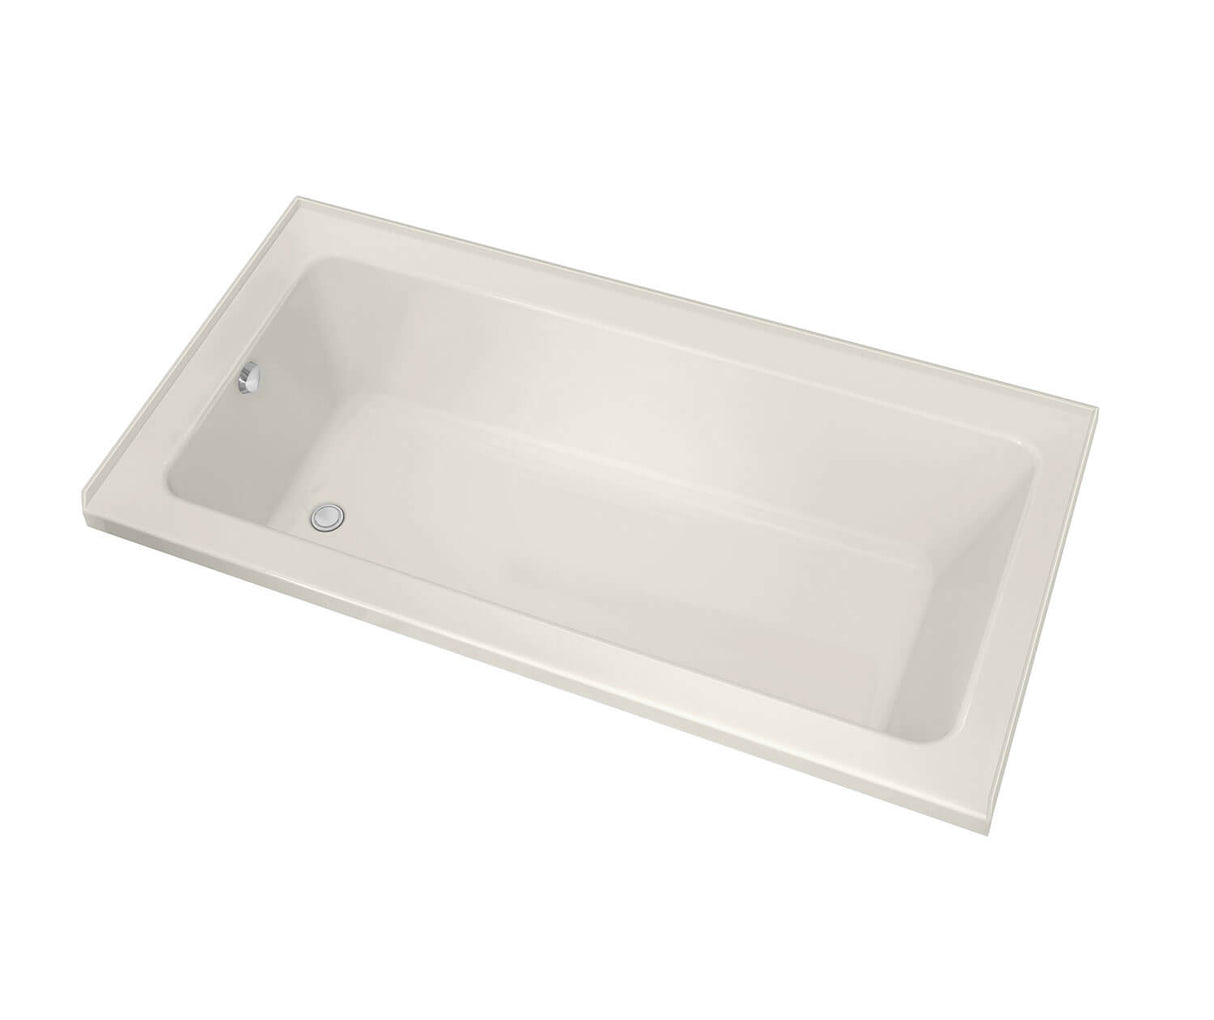 MAAX 106201-L-097-007 Pose 6032 IF Acrylic Alcove Left-Hand Drain Combined Whirlpool & Aeroeffect Bathtub in Biscuit